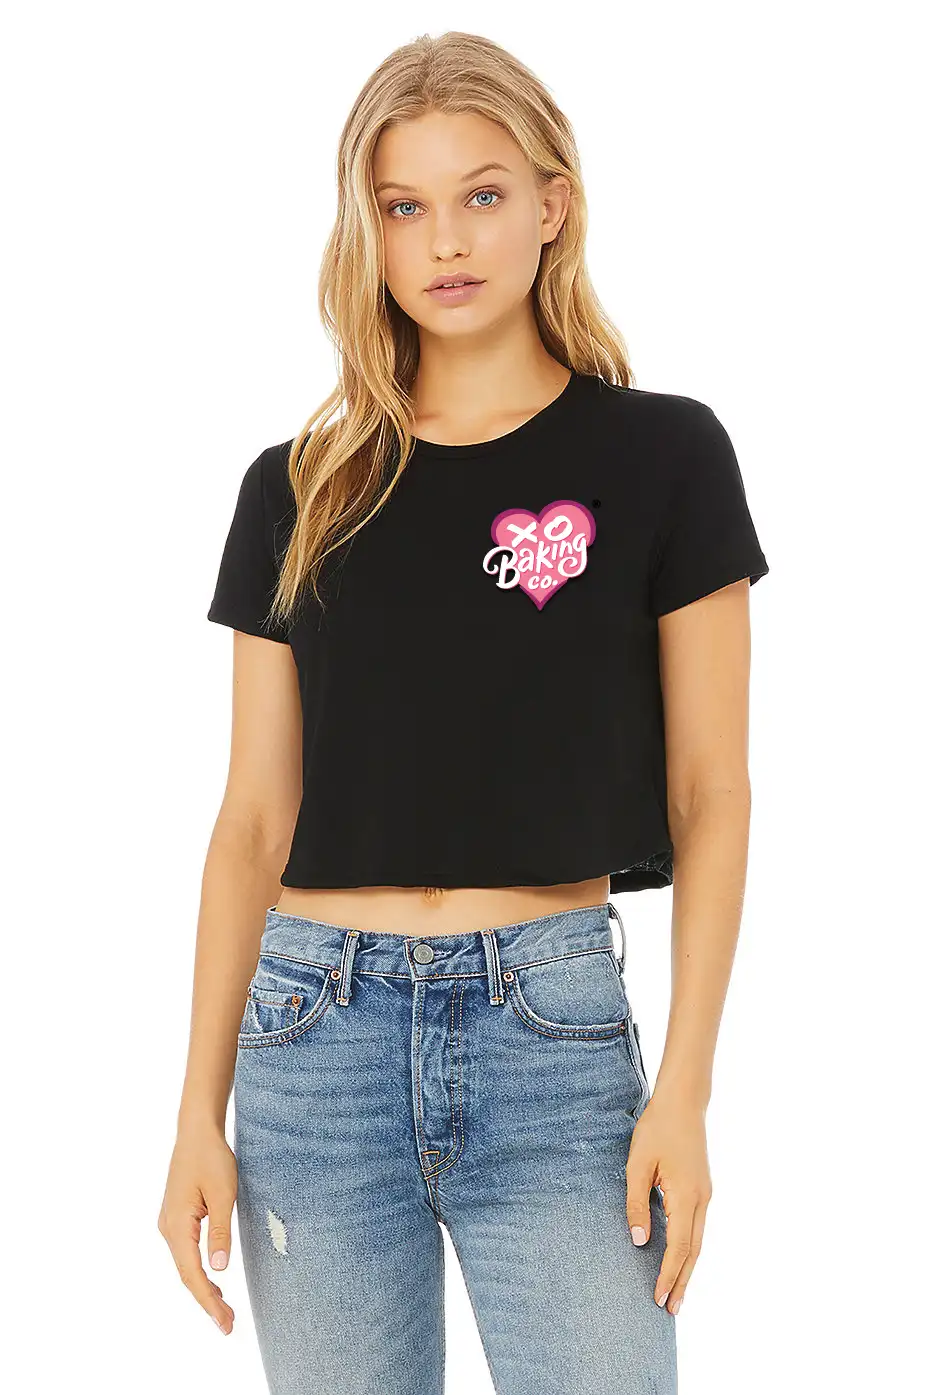 Women's flowy cropped tshirt front